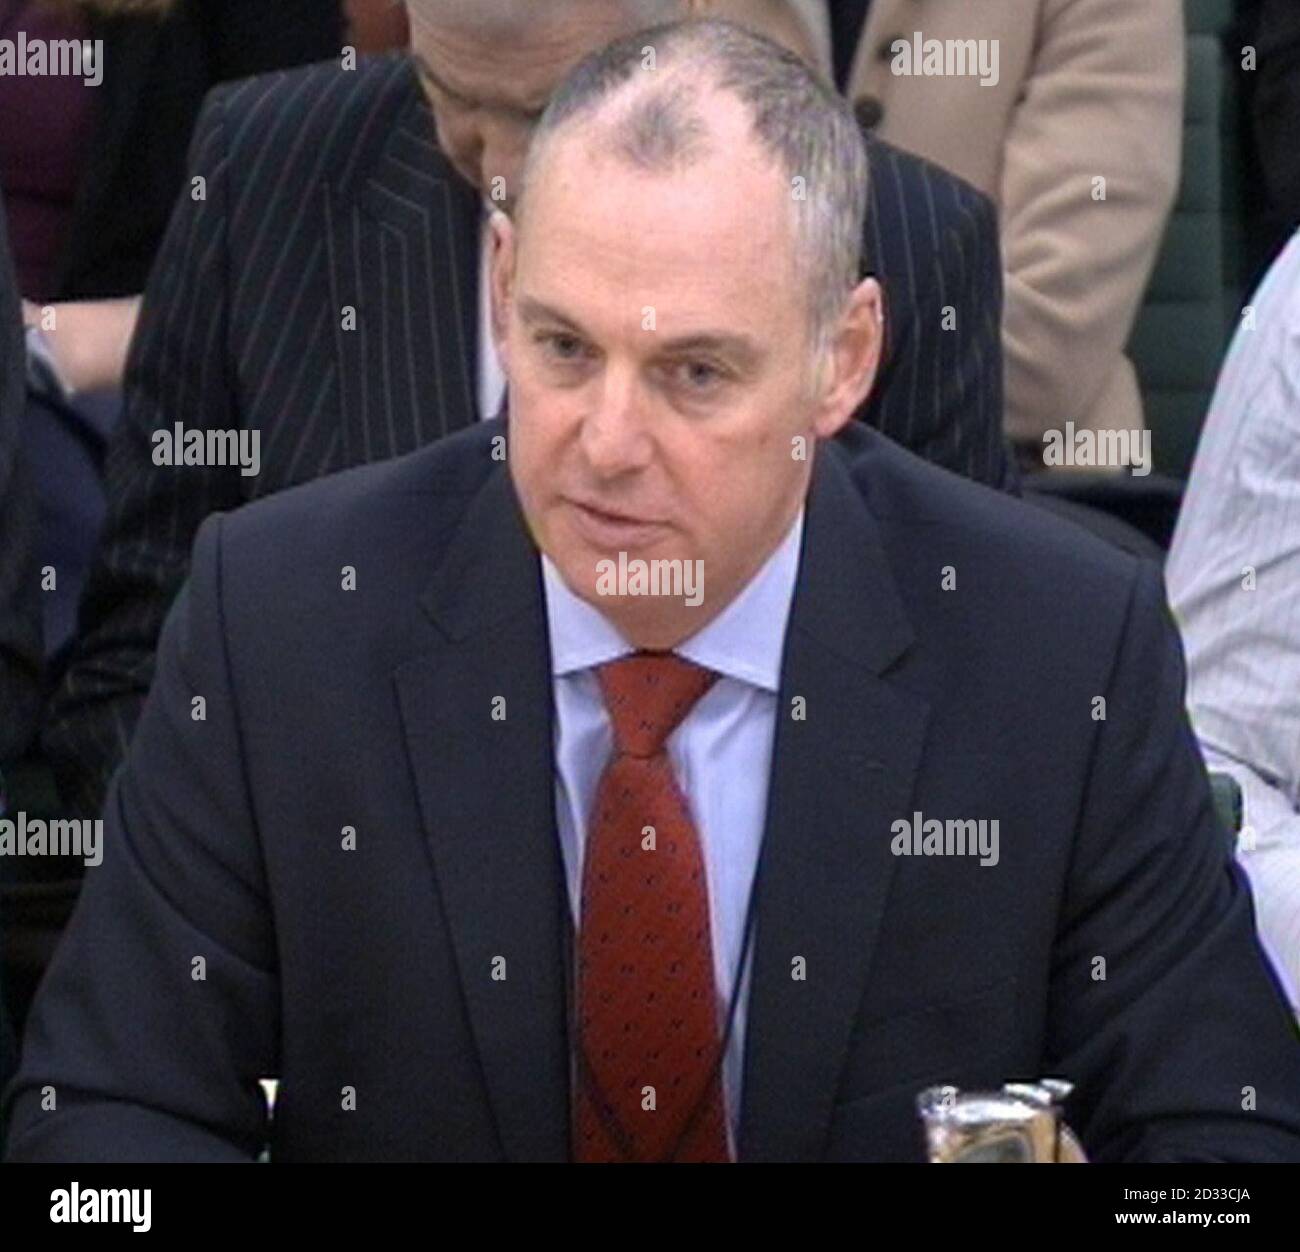 Steve Johnson Chief Executive of Electricity North West, gives evidence to the Commons Energy Committee, at the House of Commons in London, on the length of time it took to restore power to homes following the storms over Christmas. Stock Photo